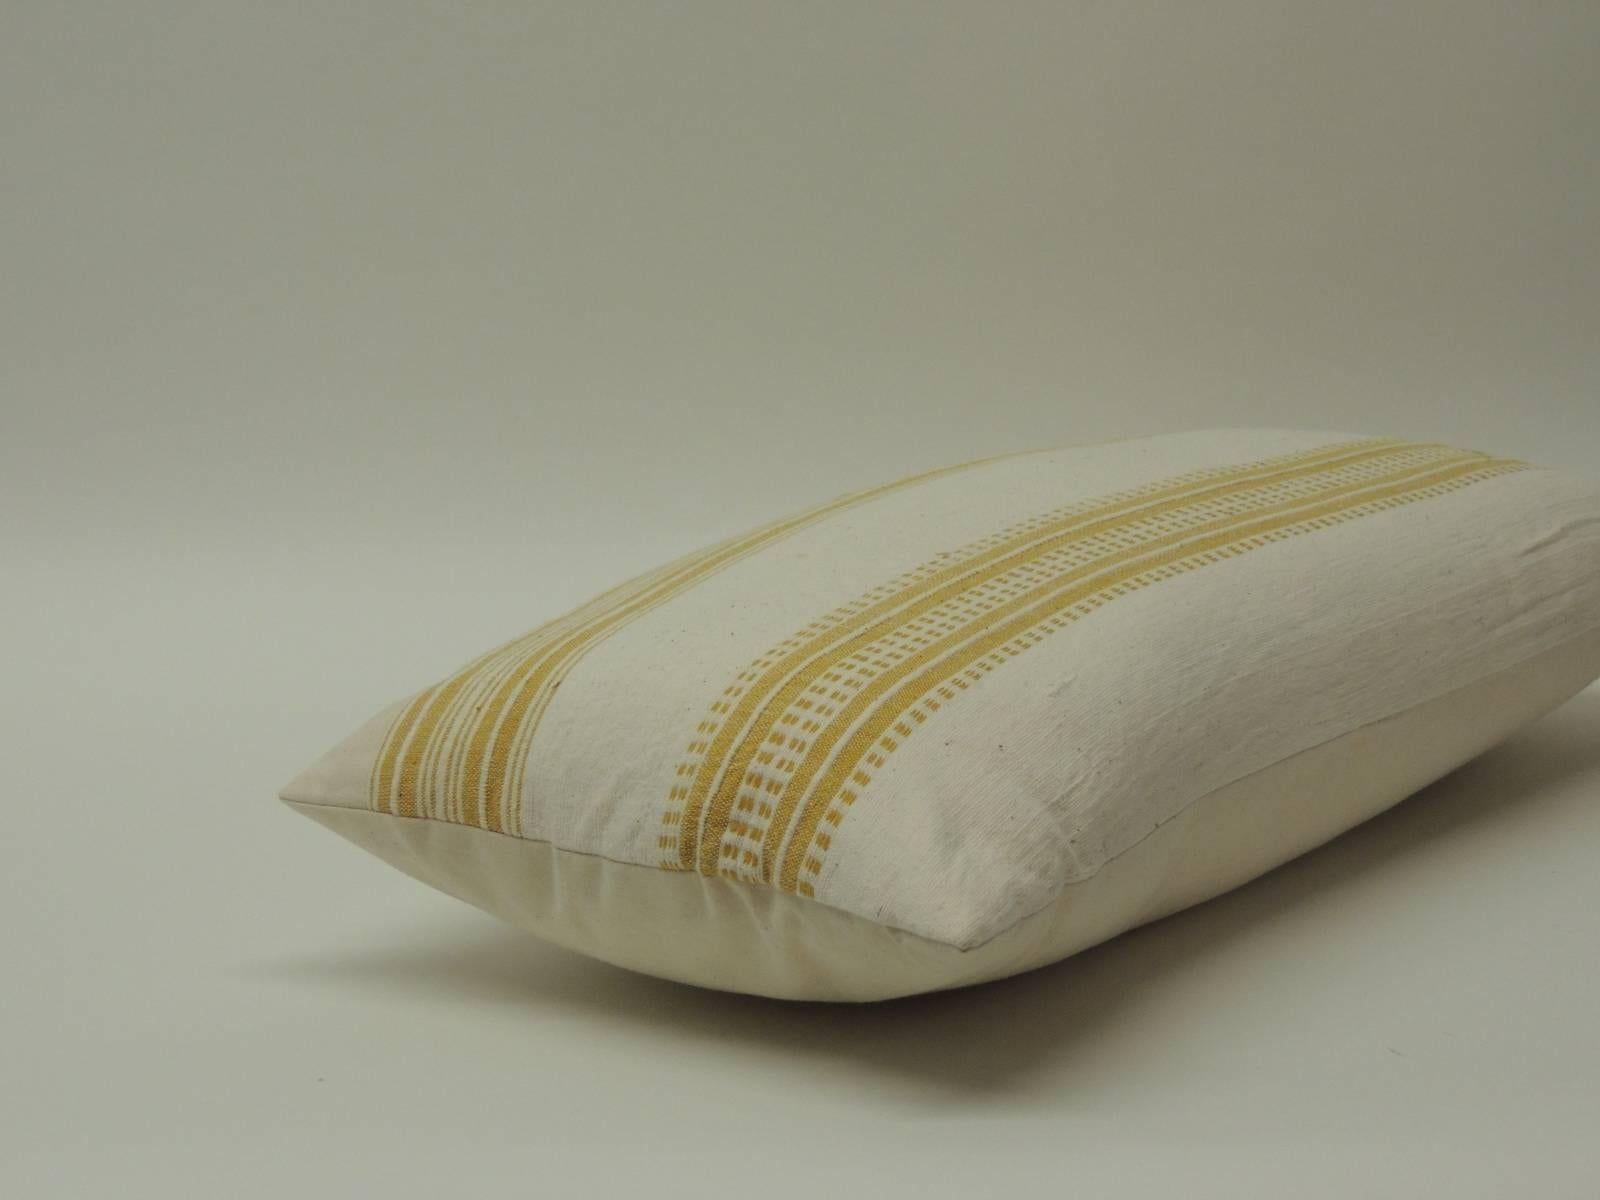 Antique Textiles Galleries...
Yellow stripes woven Turkish cotton bolster pillow in a mustard yellow textile on natural cotton with natural linen backing. The front panel of this decorative pillow is from the 1980s. Boho-chic decorative style. The